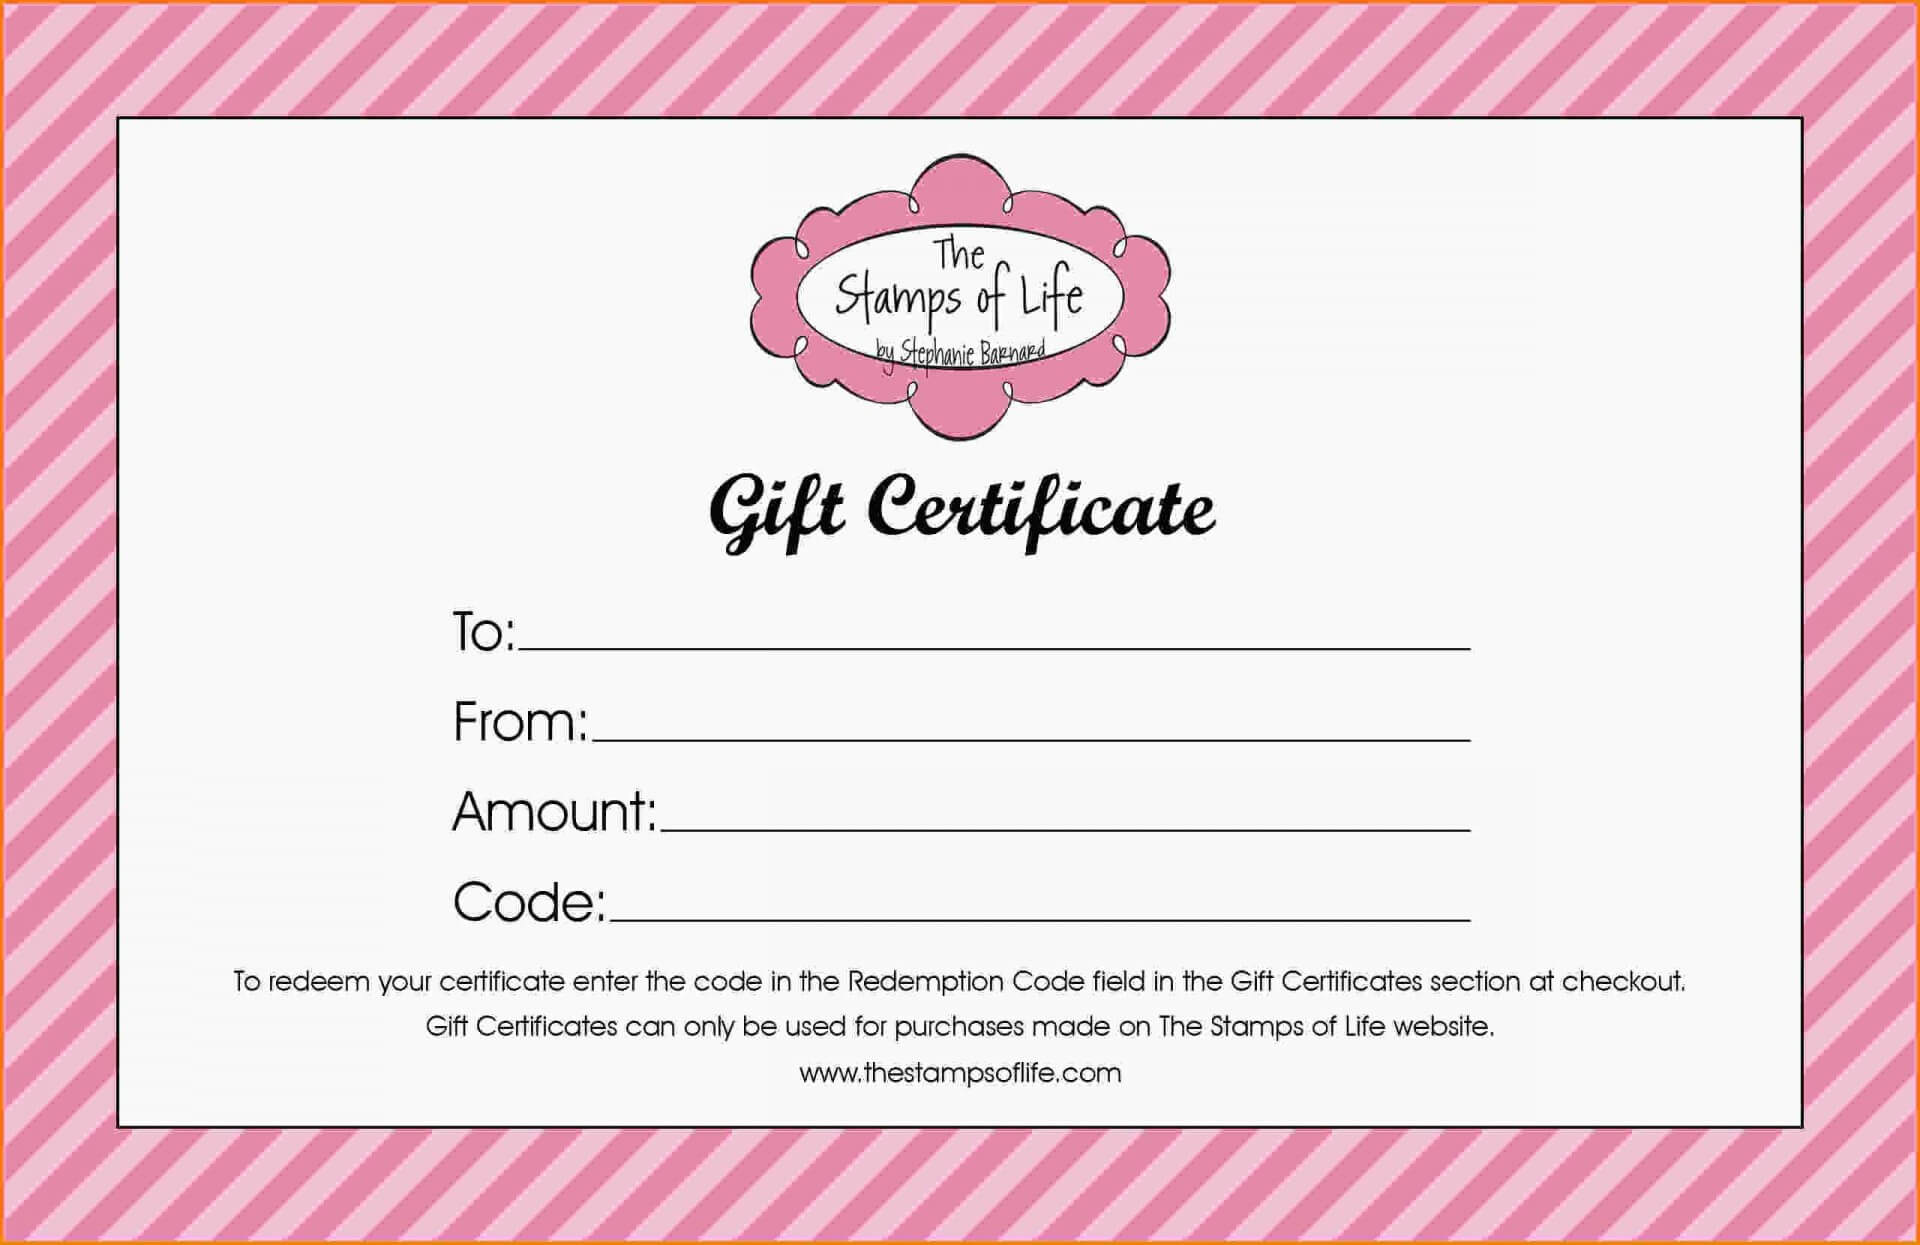 011 Free Certificates Printing For Nail Salon Gift Samples Inside Nail Gift Certificate Template Free